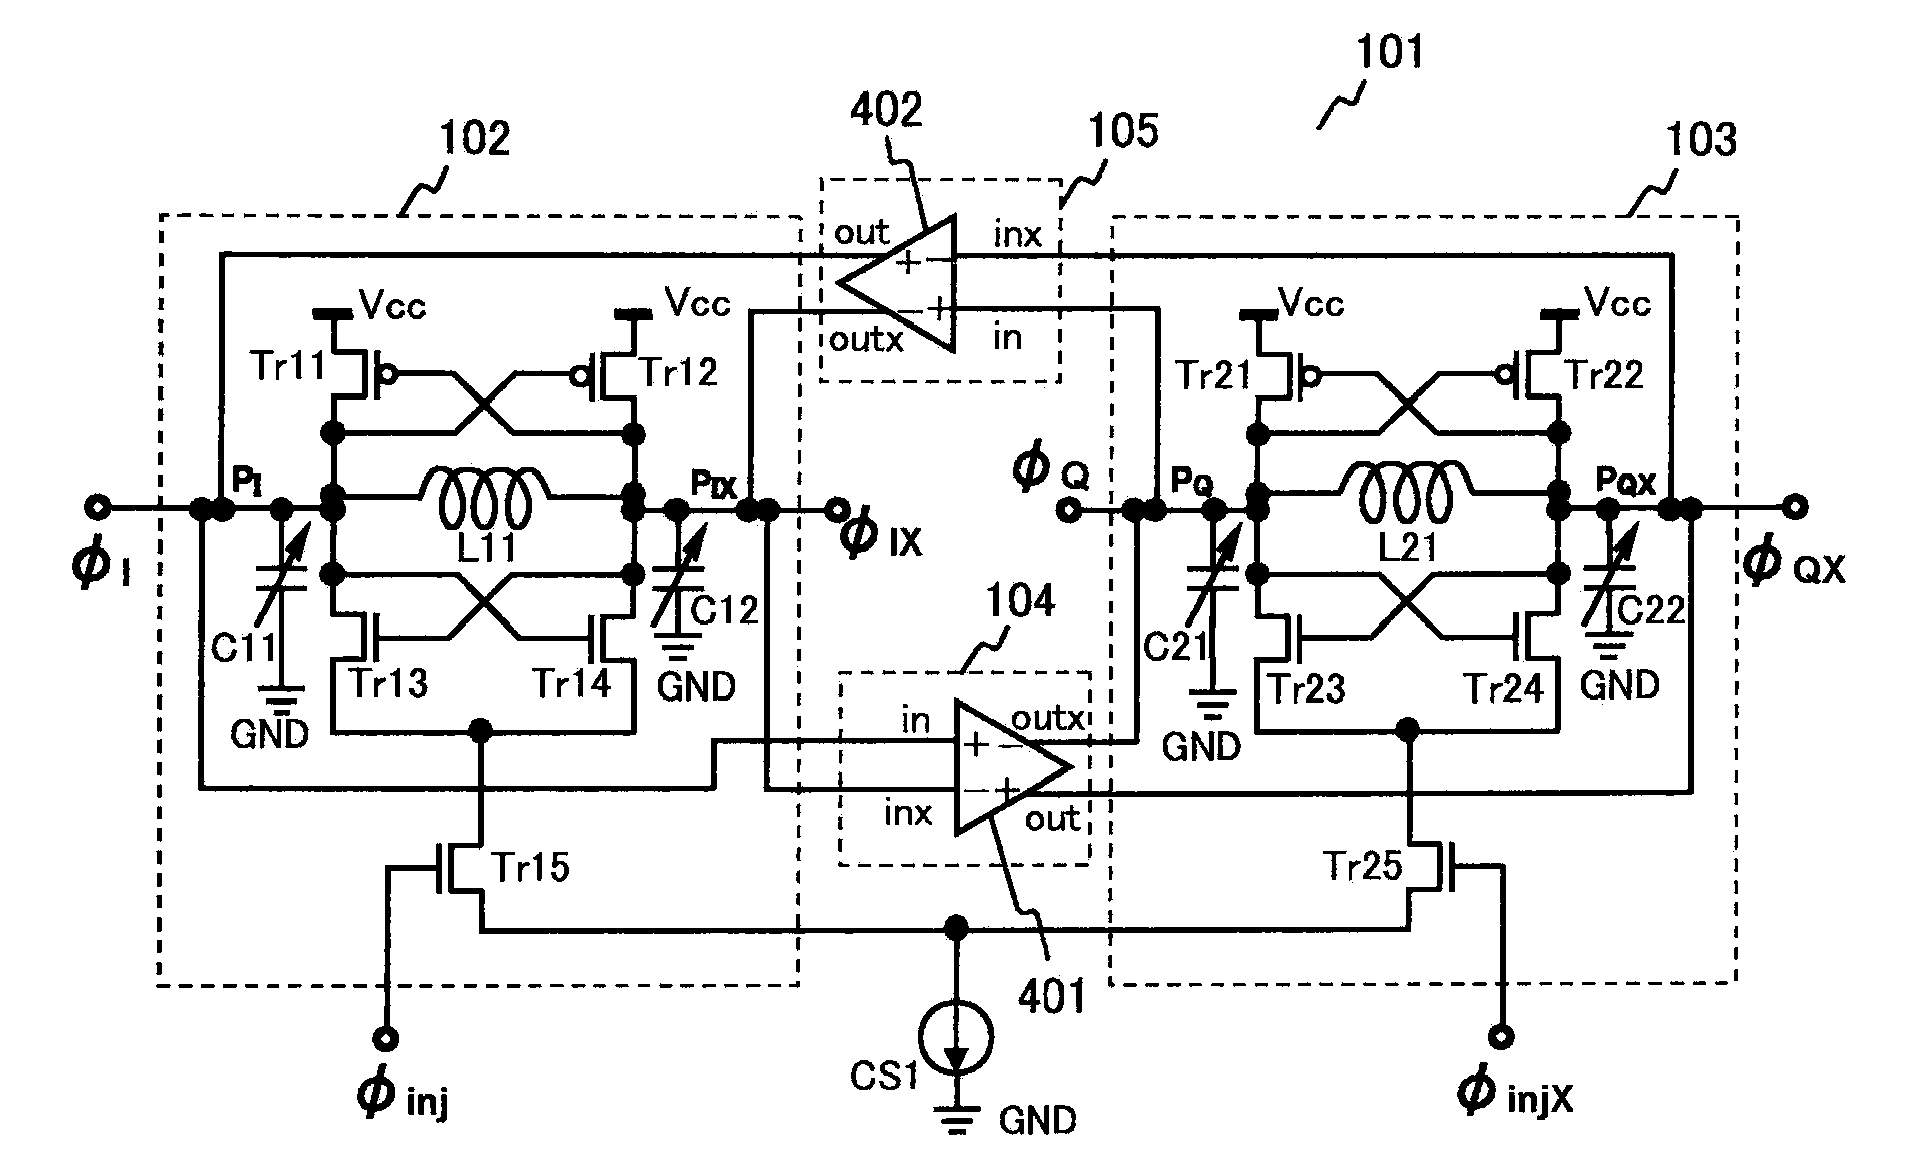 Clock frequency dividing circuit